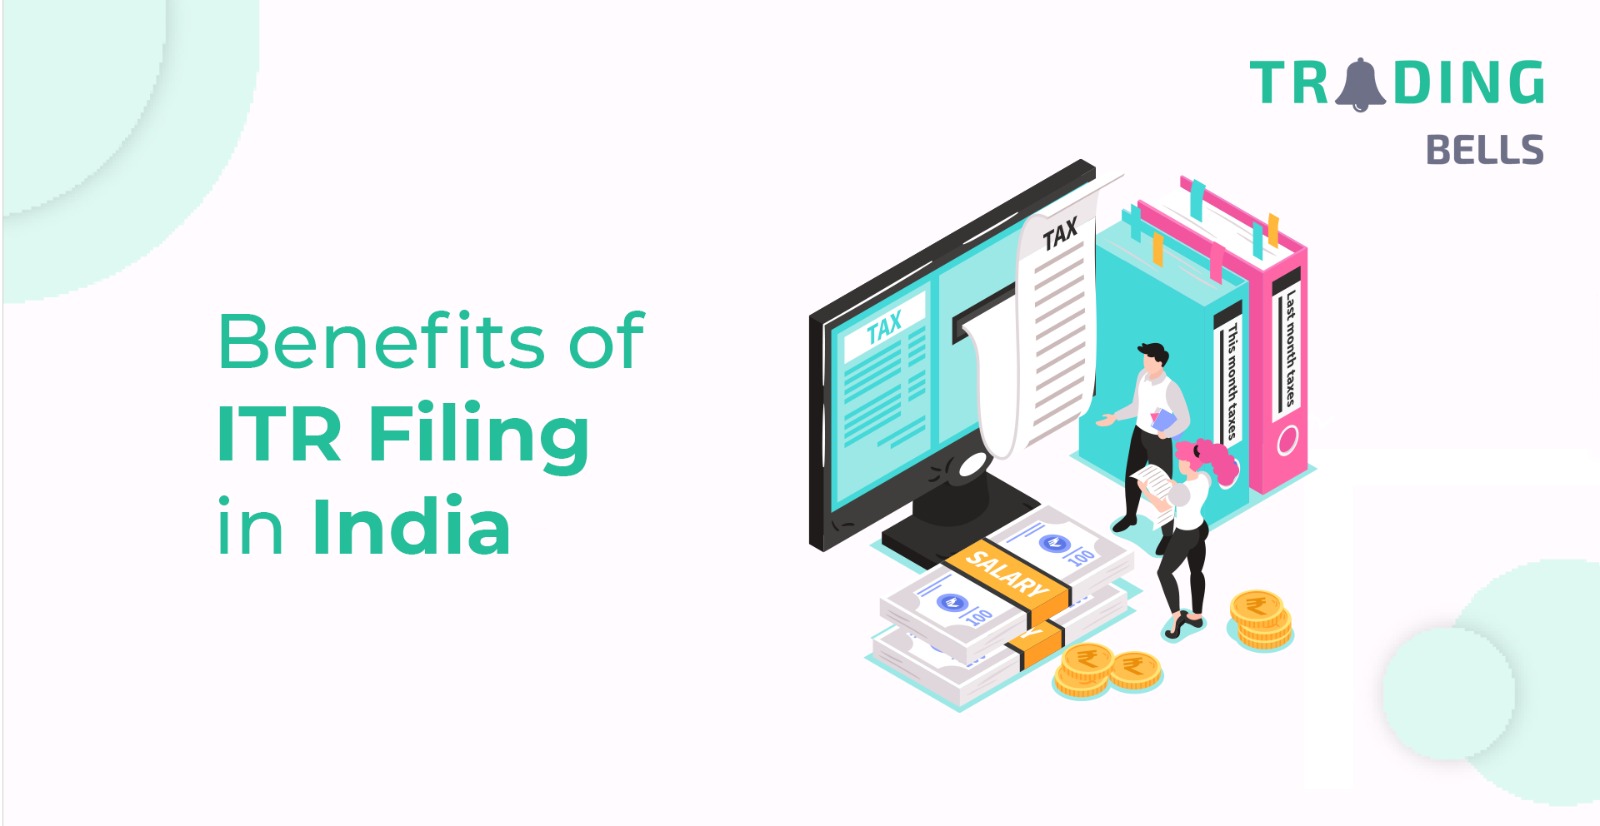 Benefits of ITR Filing in India